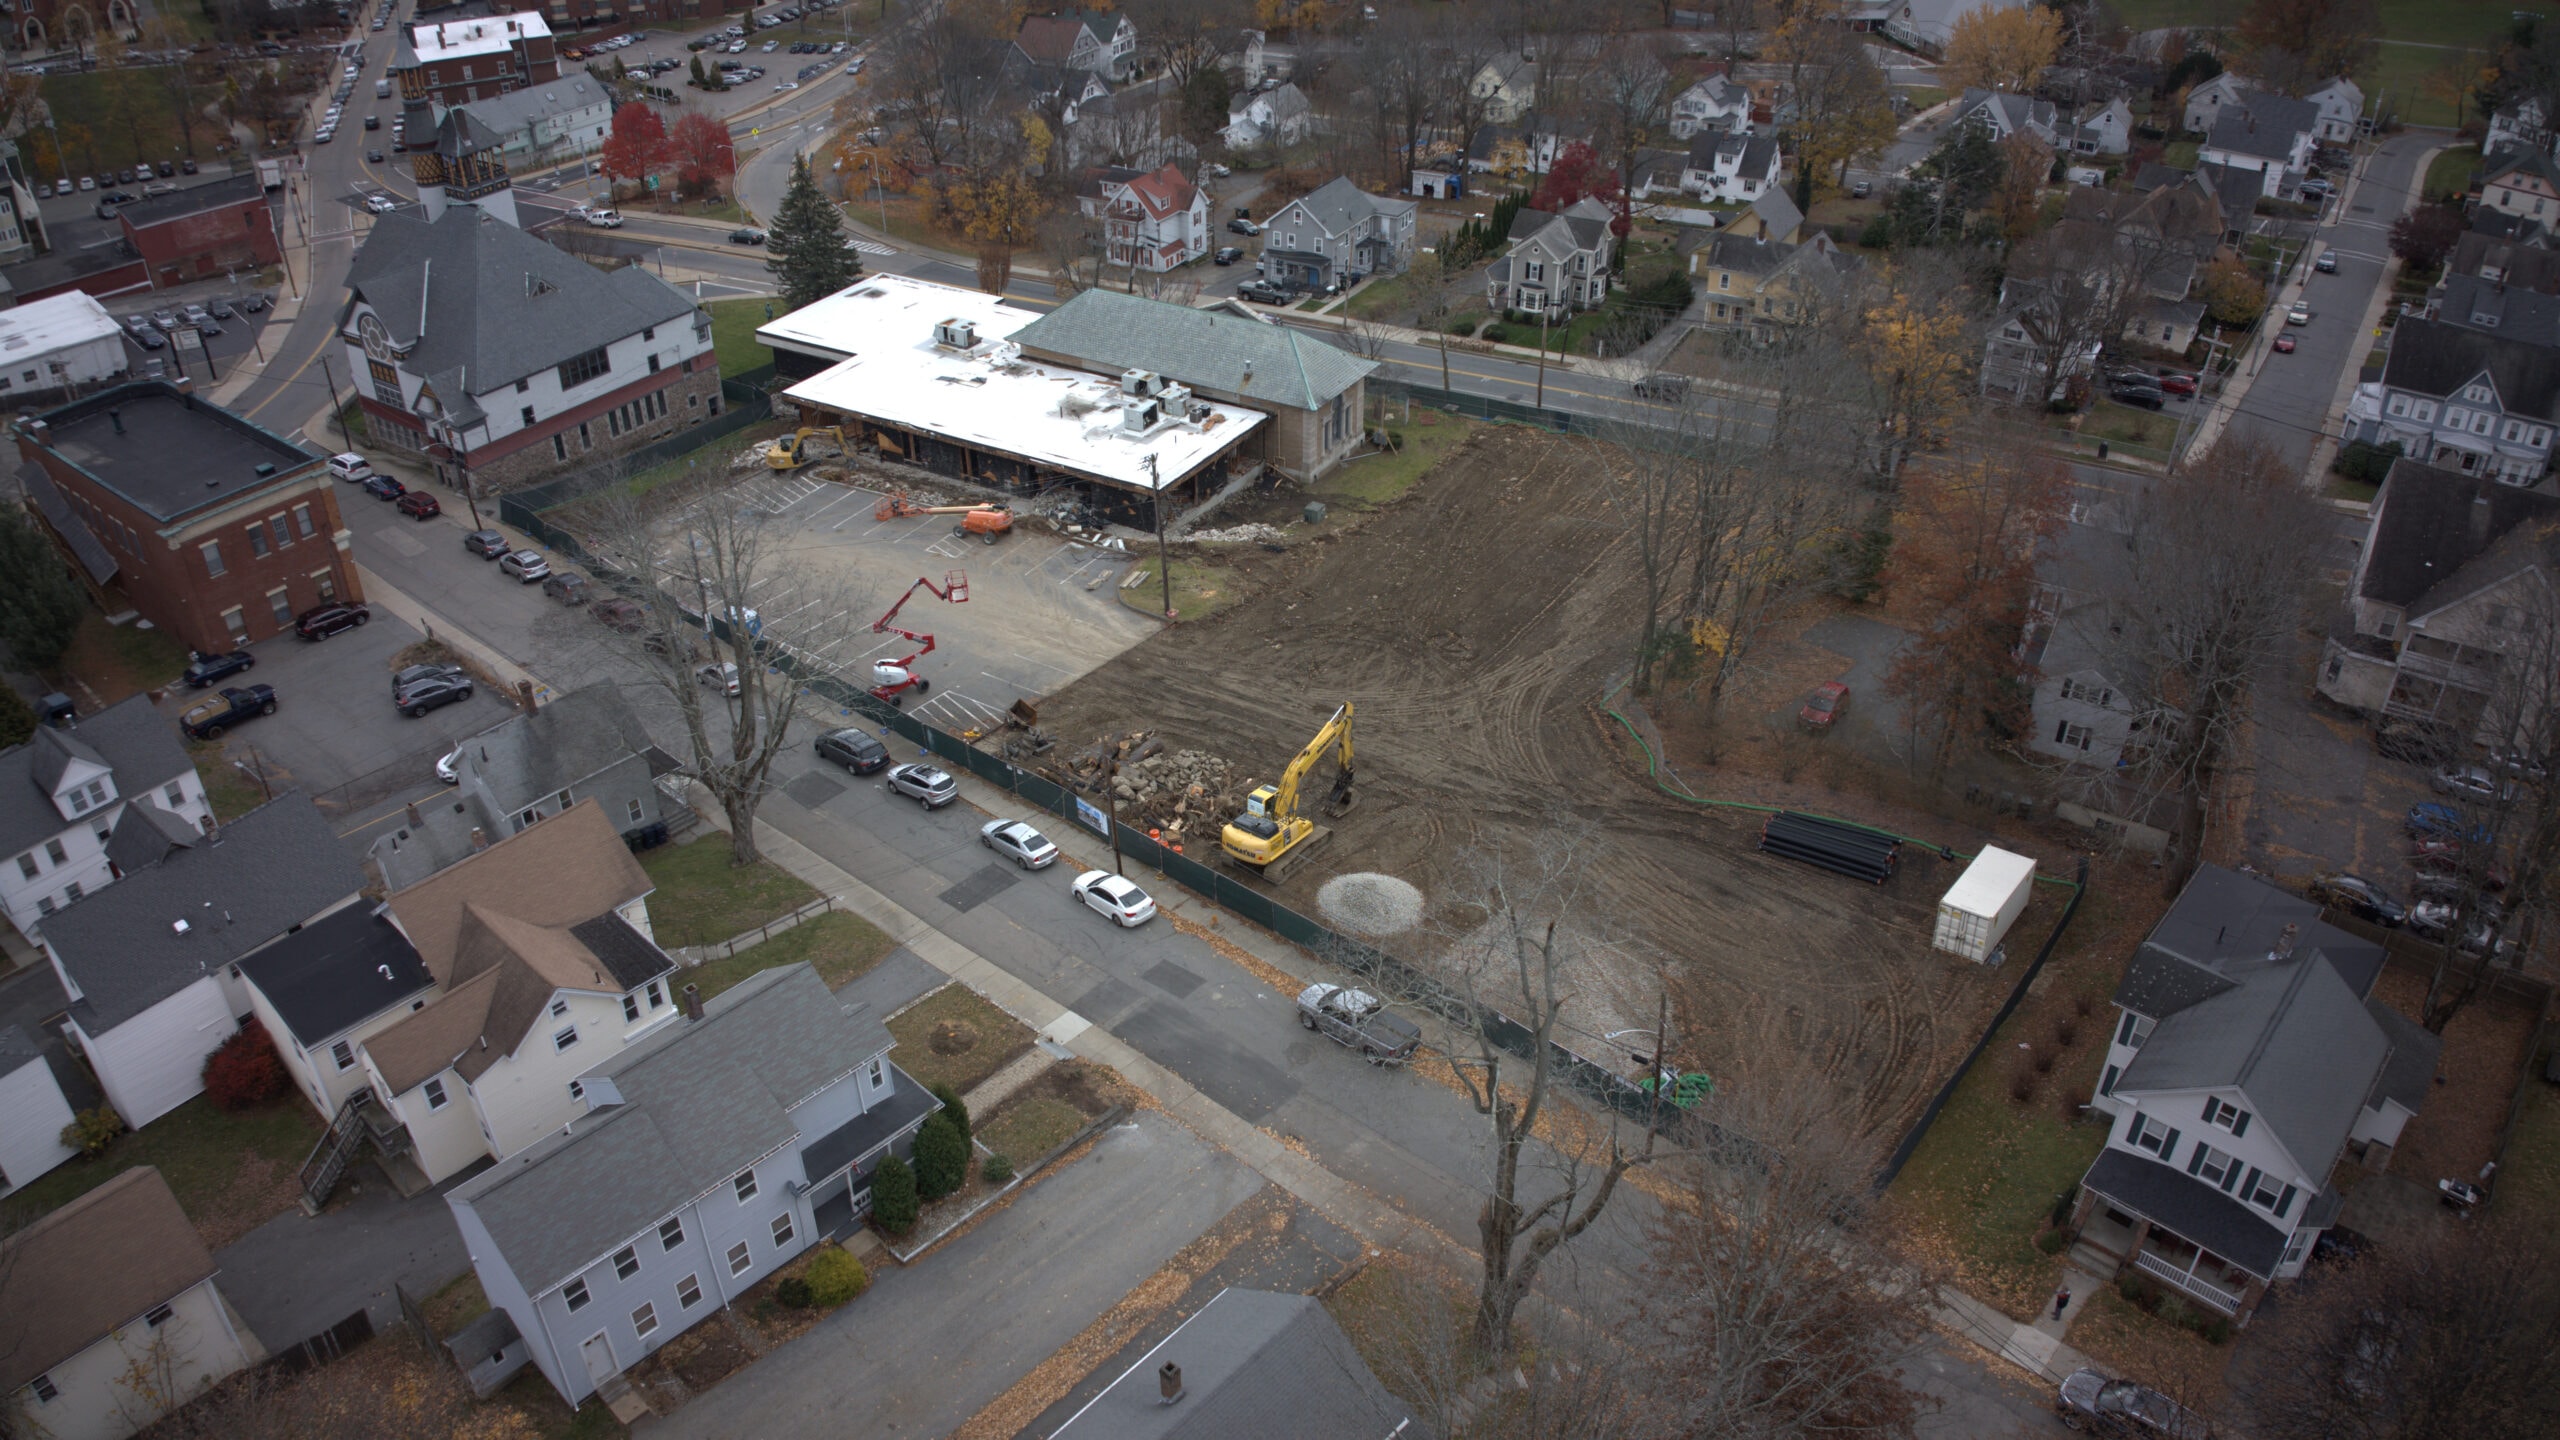 Work continues on Marlborough library renovations